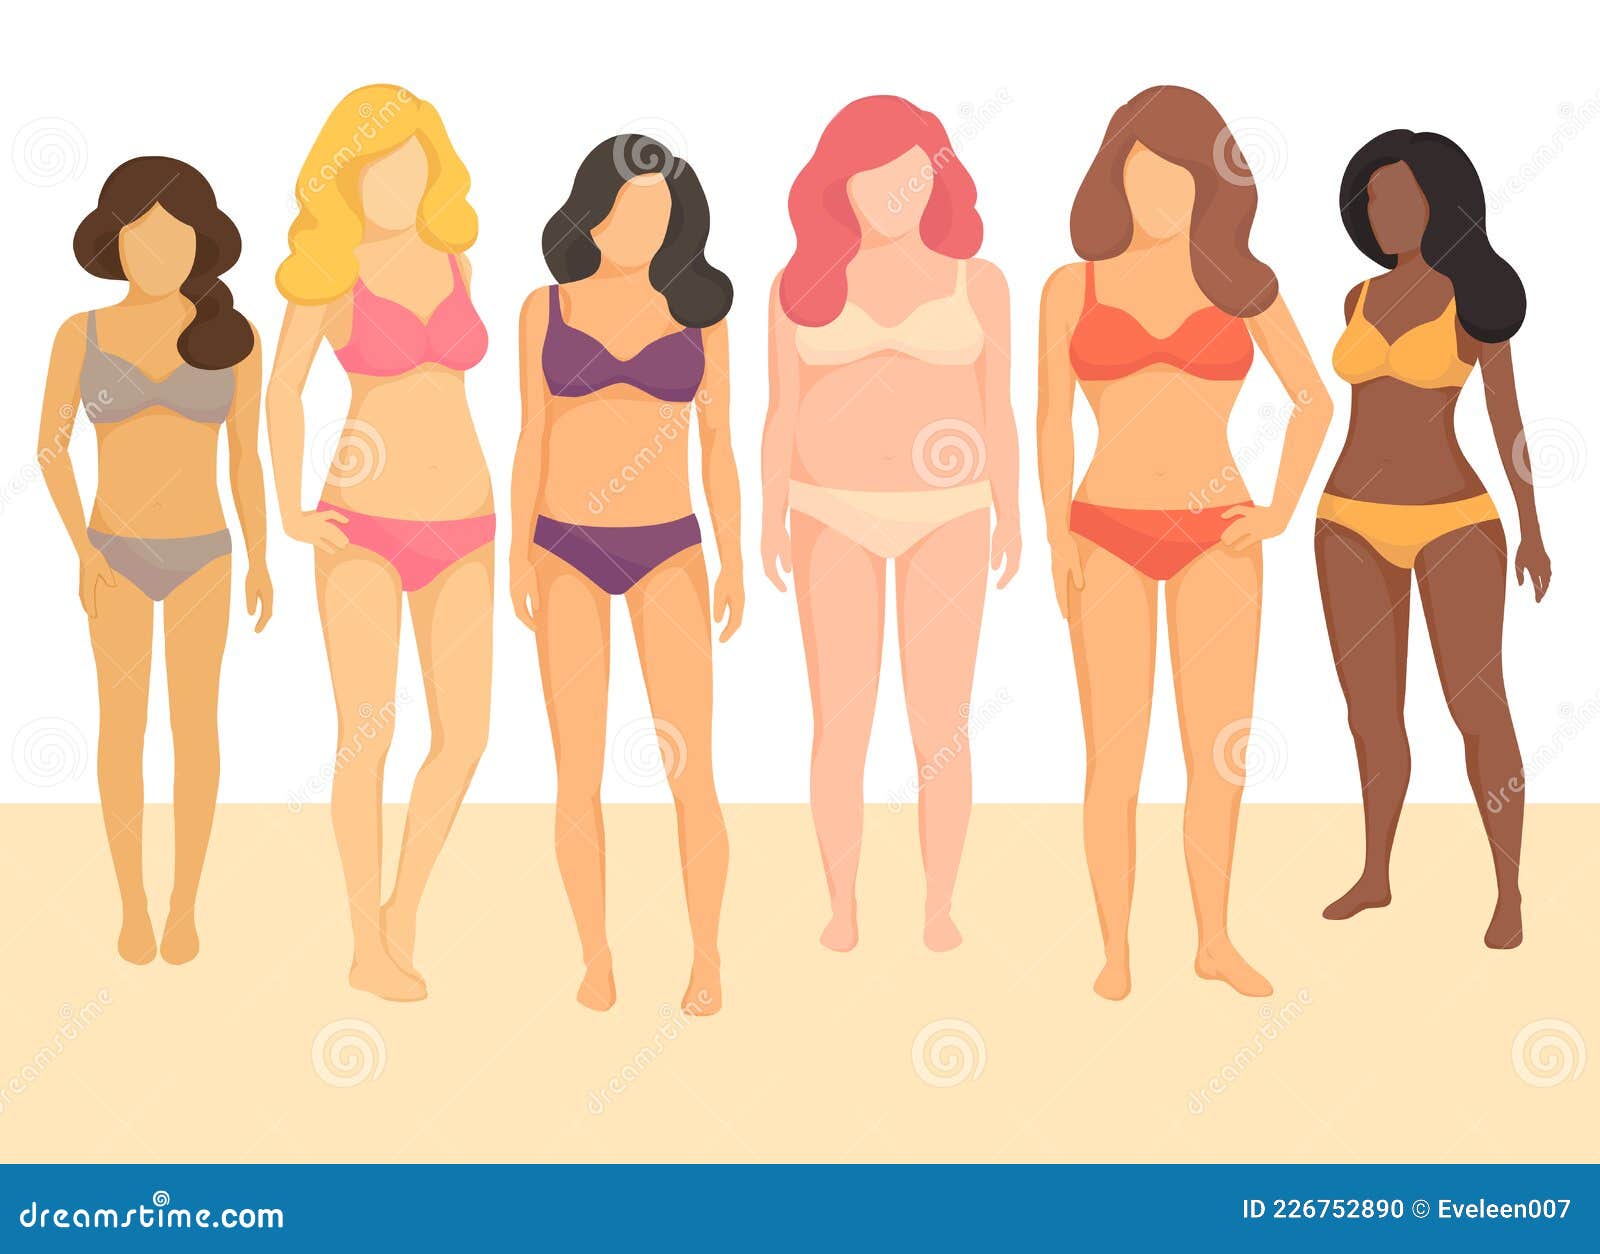 Positive Body Movement. Female Body Types and Sizes in Bathing